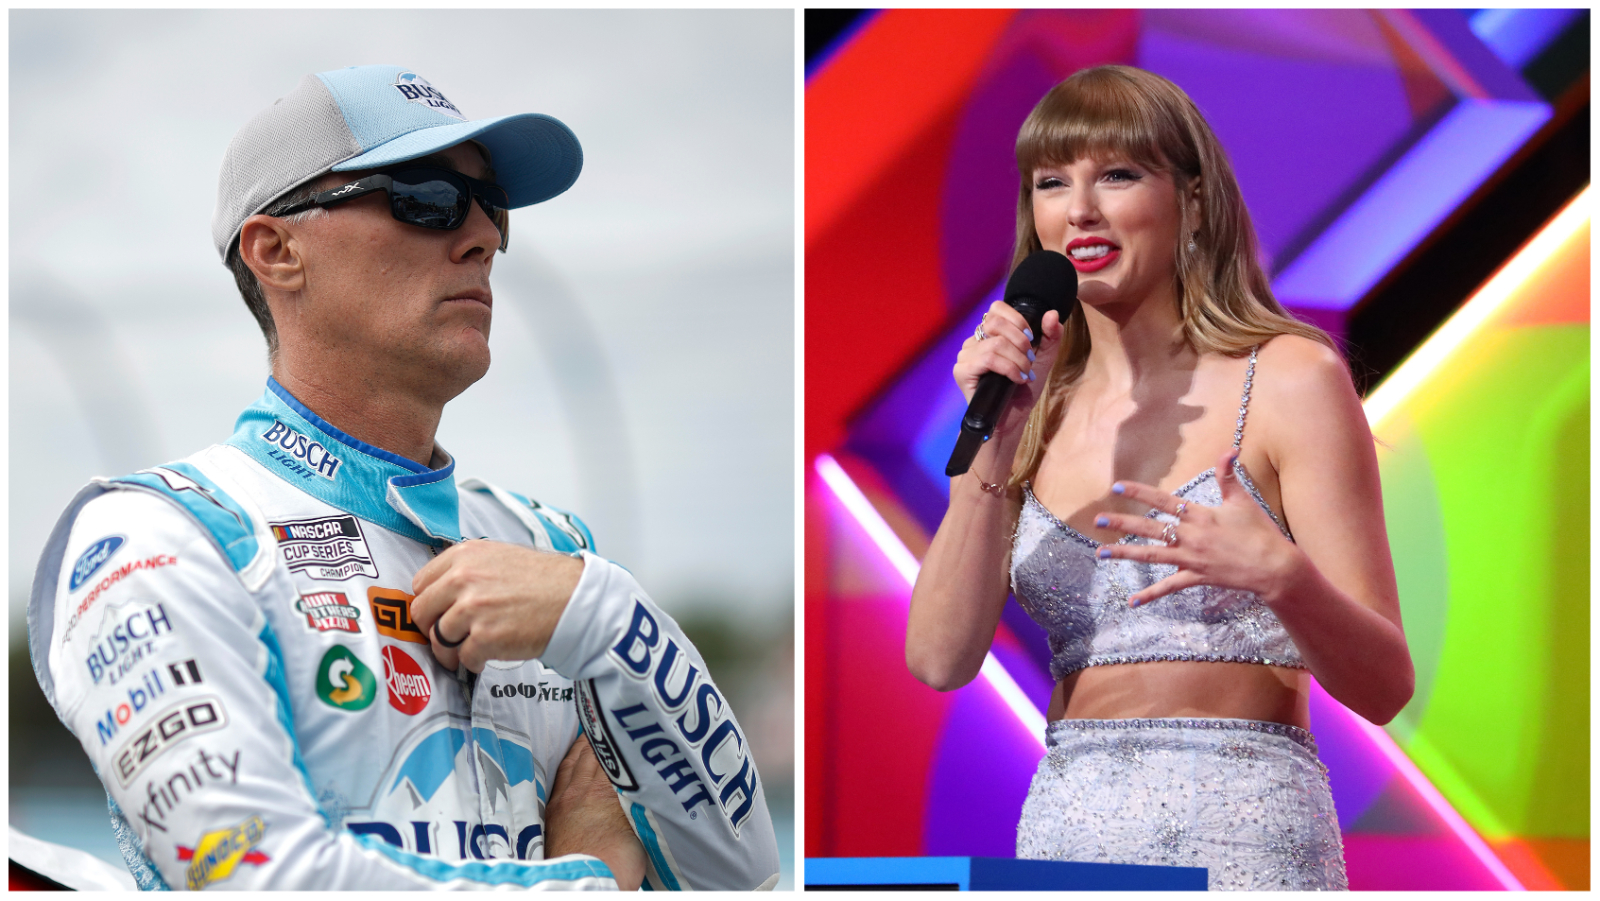 NASCAR Cup Series driver Kevin Harvick and entertainer Taylor Swift. | Getty Images